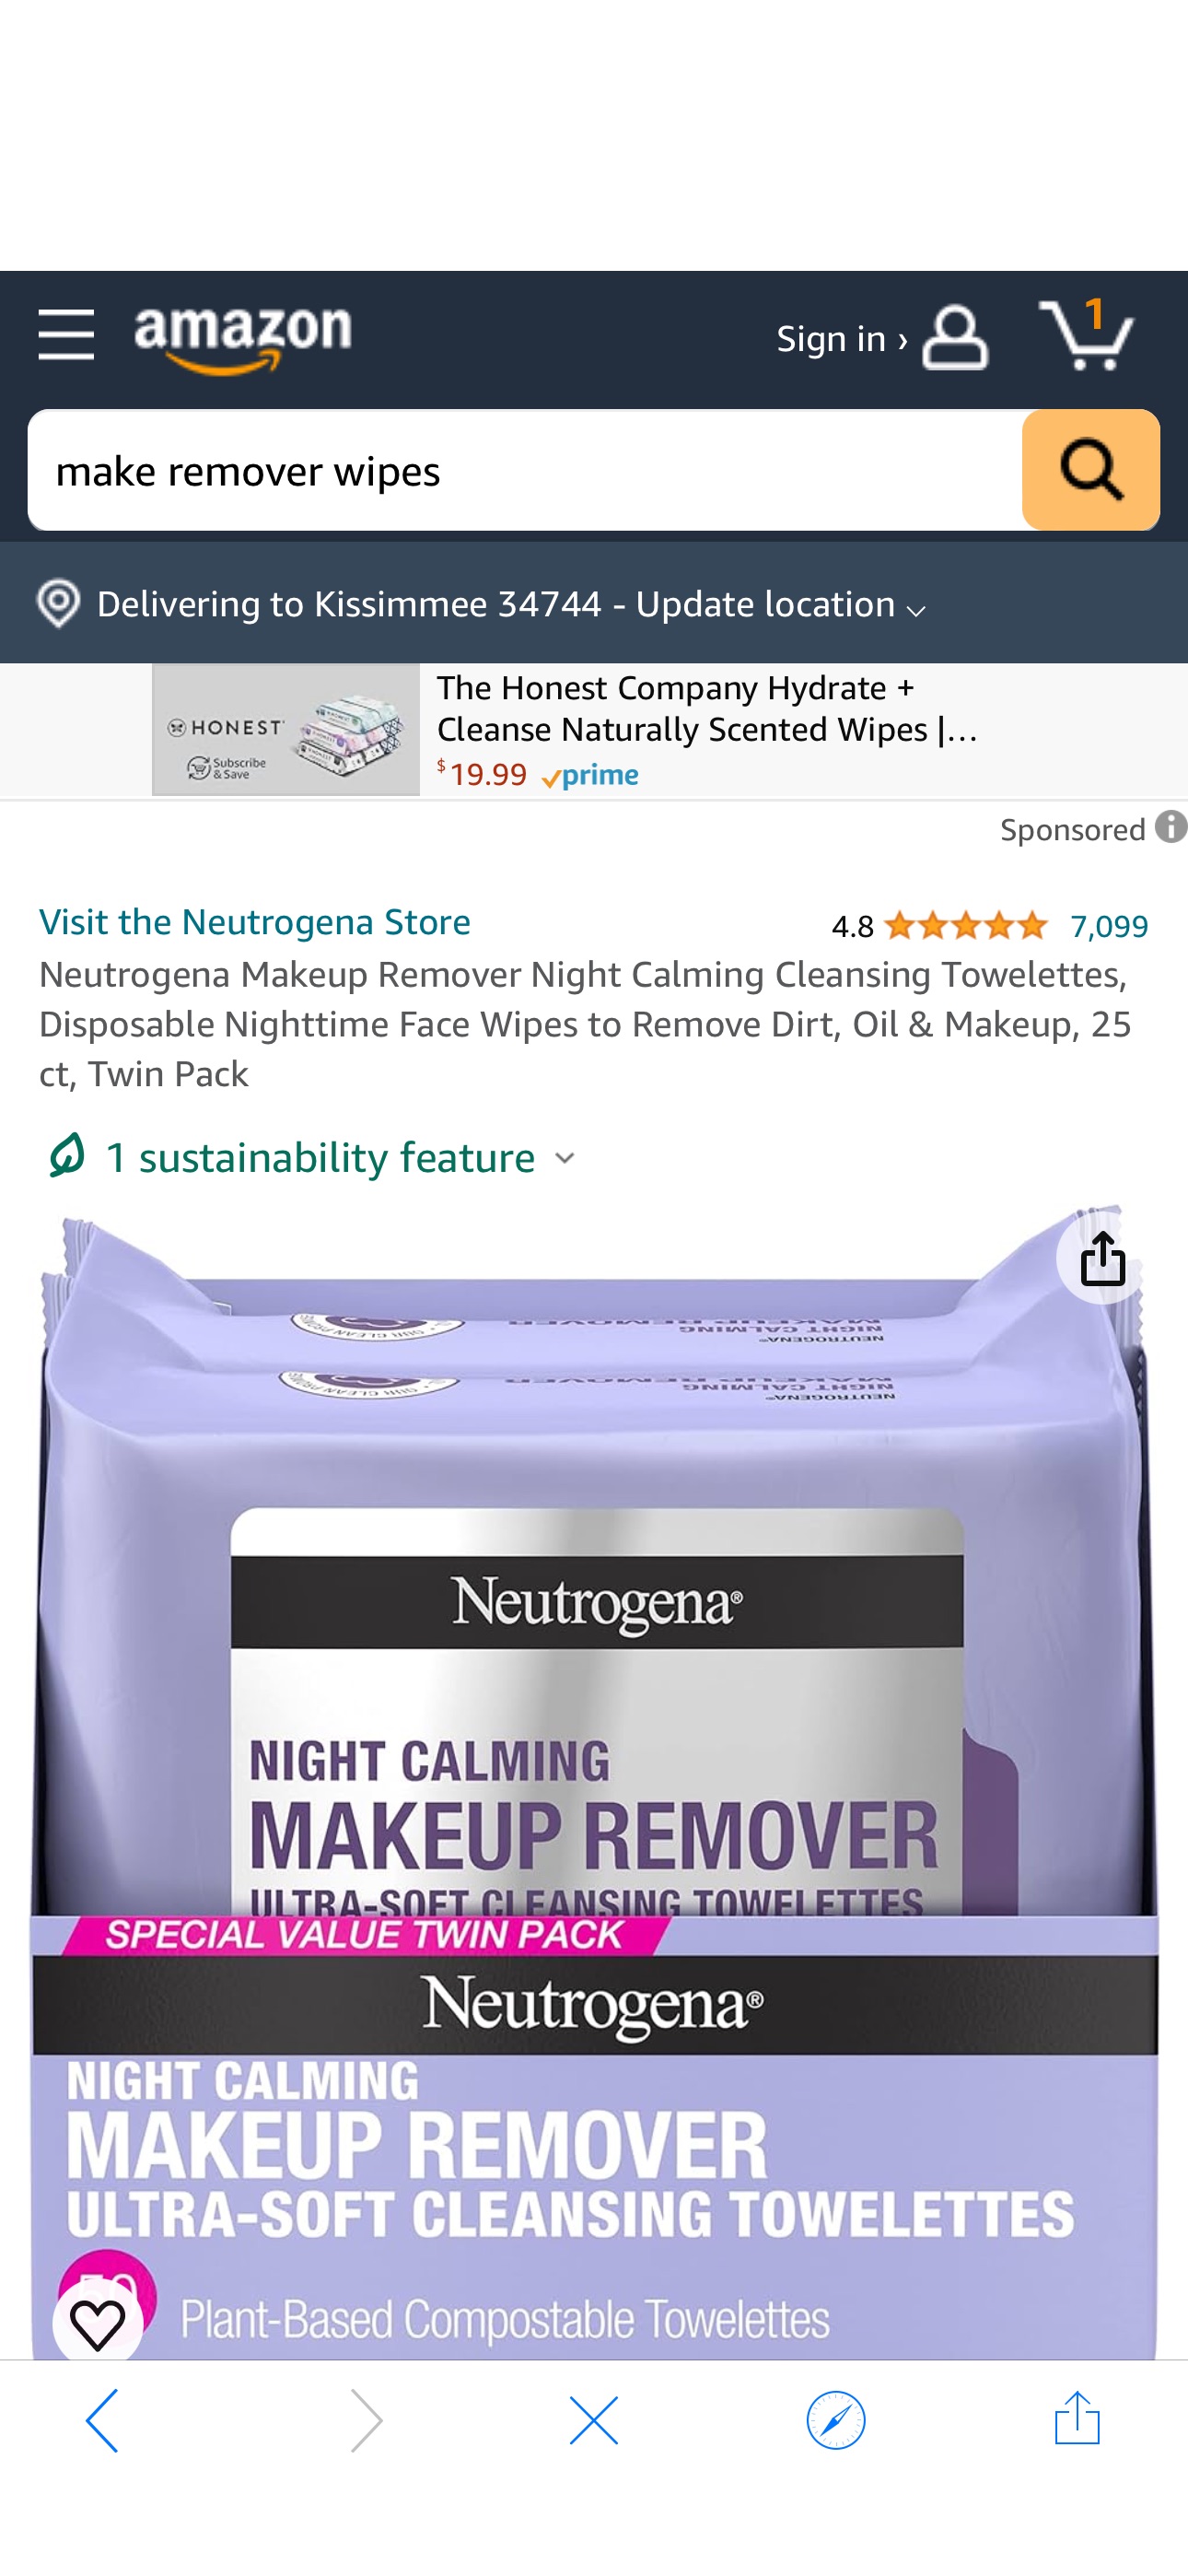 Amazon.com: Neutrogena Makeup Remover Night Calming Cleansing Towelettes, Disposable Nighttime Face Wipes to Remove Dirt, Oil & Makeup, 25 ct, Twin Pack : Beauty & Personal Care